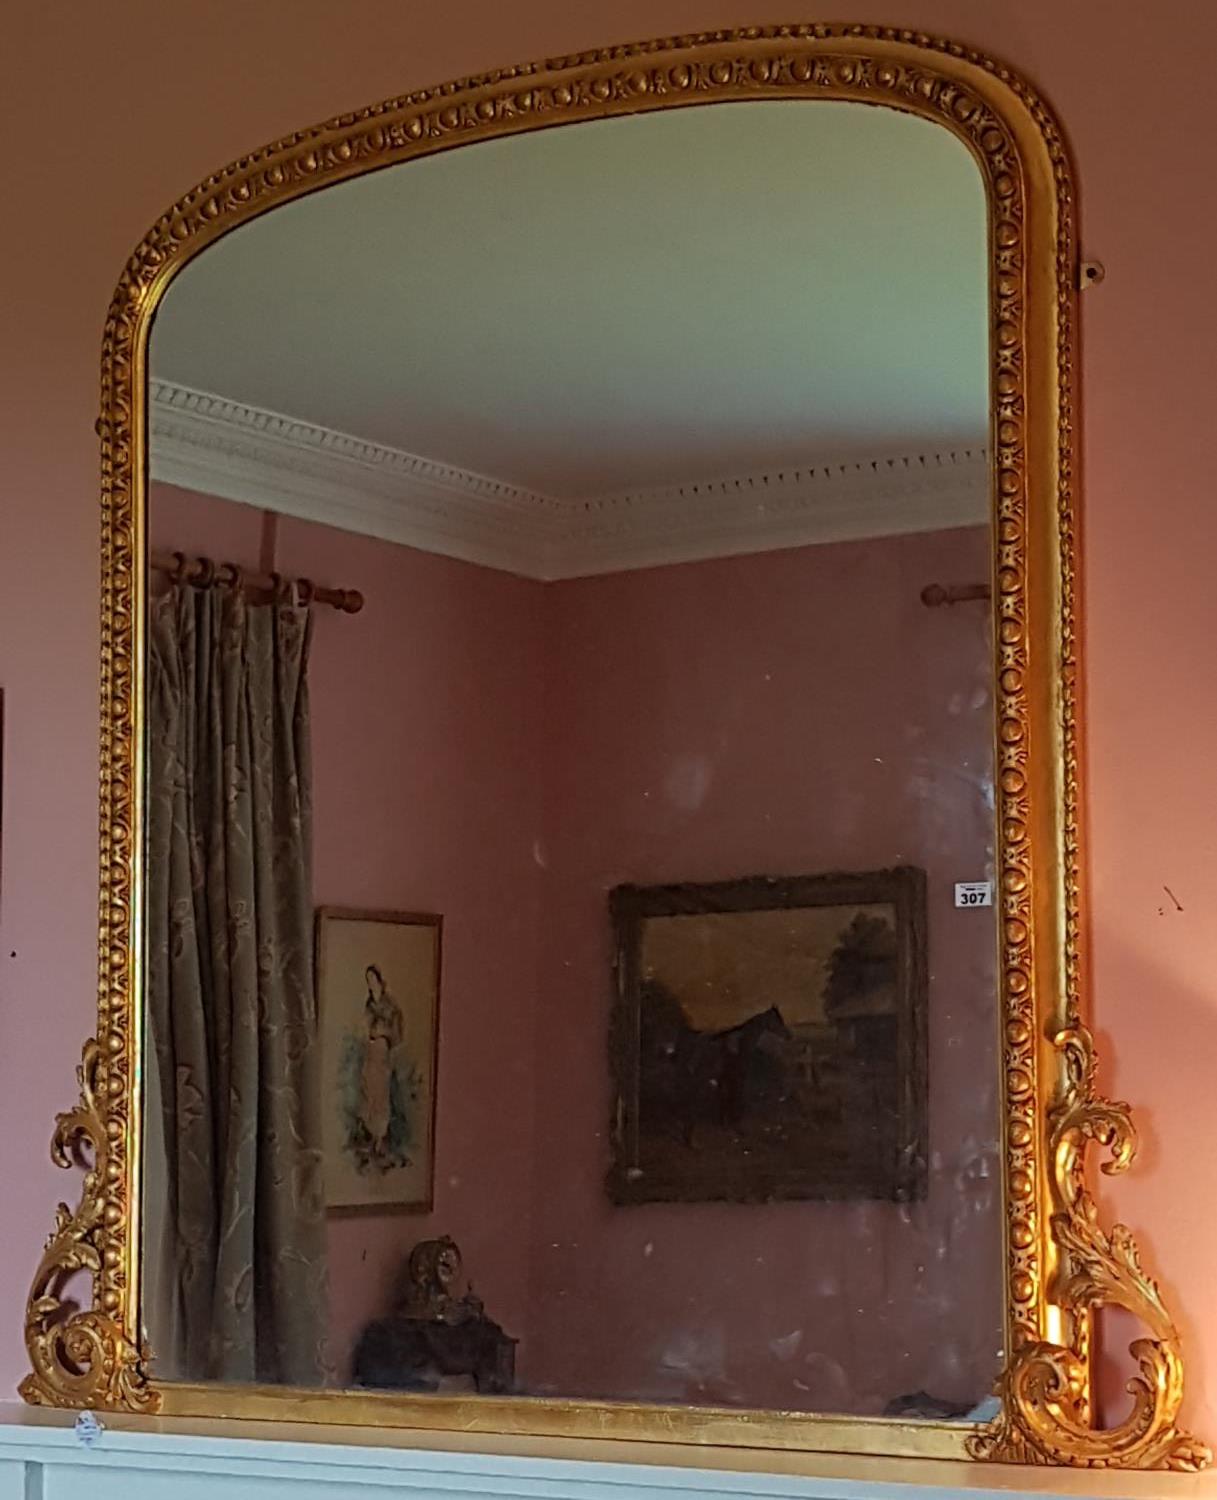 A Victorian Timber and Plaster Gilt Overmantel Mirror with egg and dart moulding. Approx. L 130 x